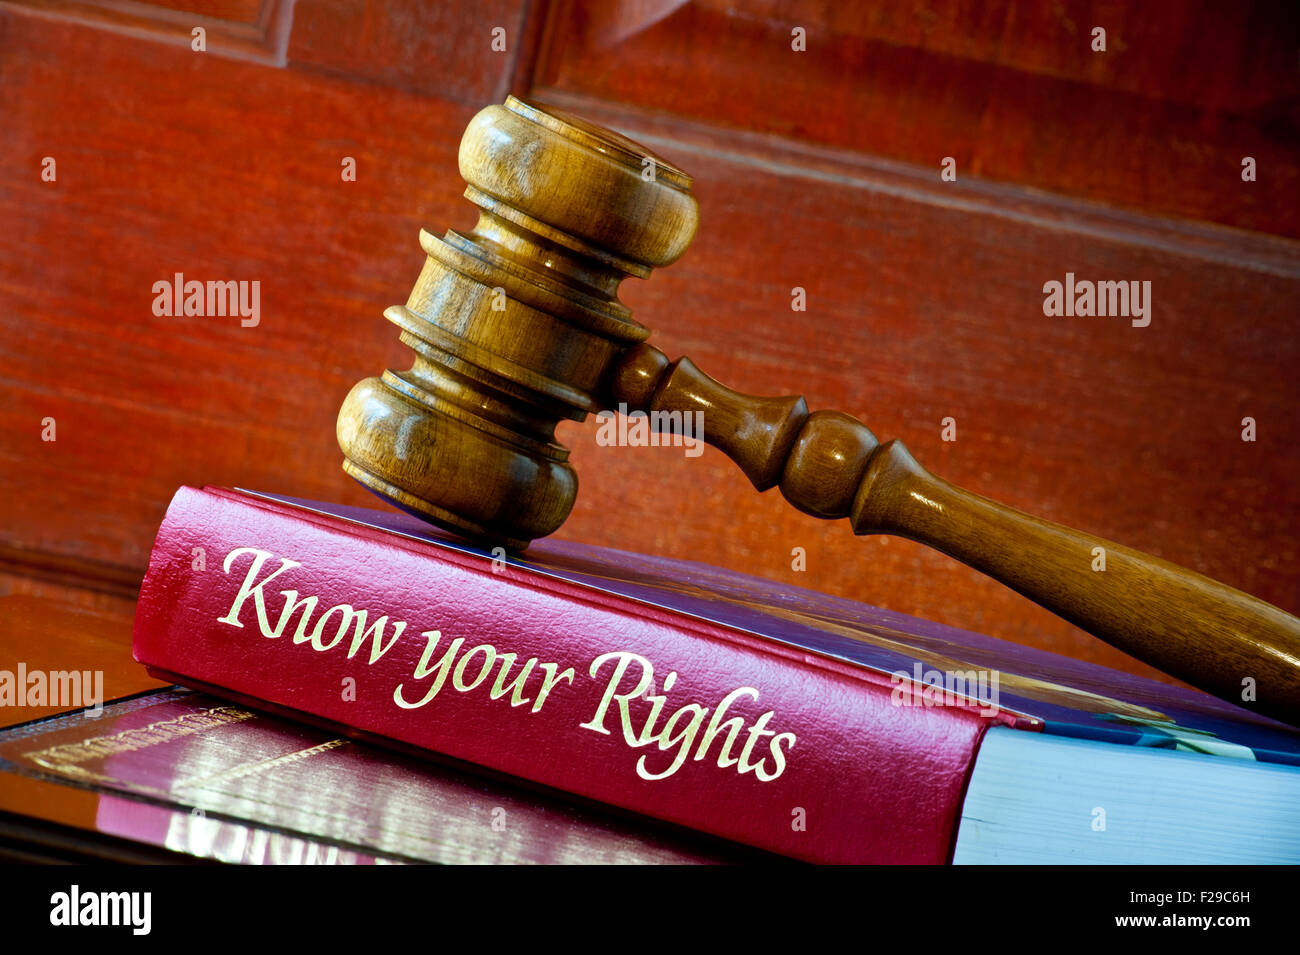 CONSUMER PROTECTION CONCEPT LAW Legal concept of Judges wooden gavel on 'Know your Rights' personal consumer legal advice book on leather bound desk Stock Photo